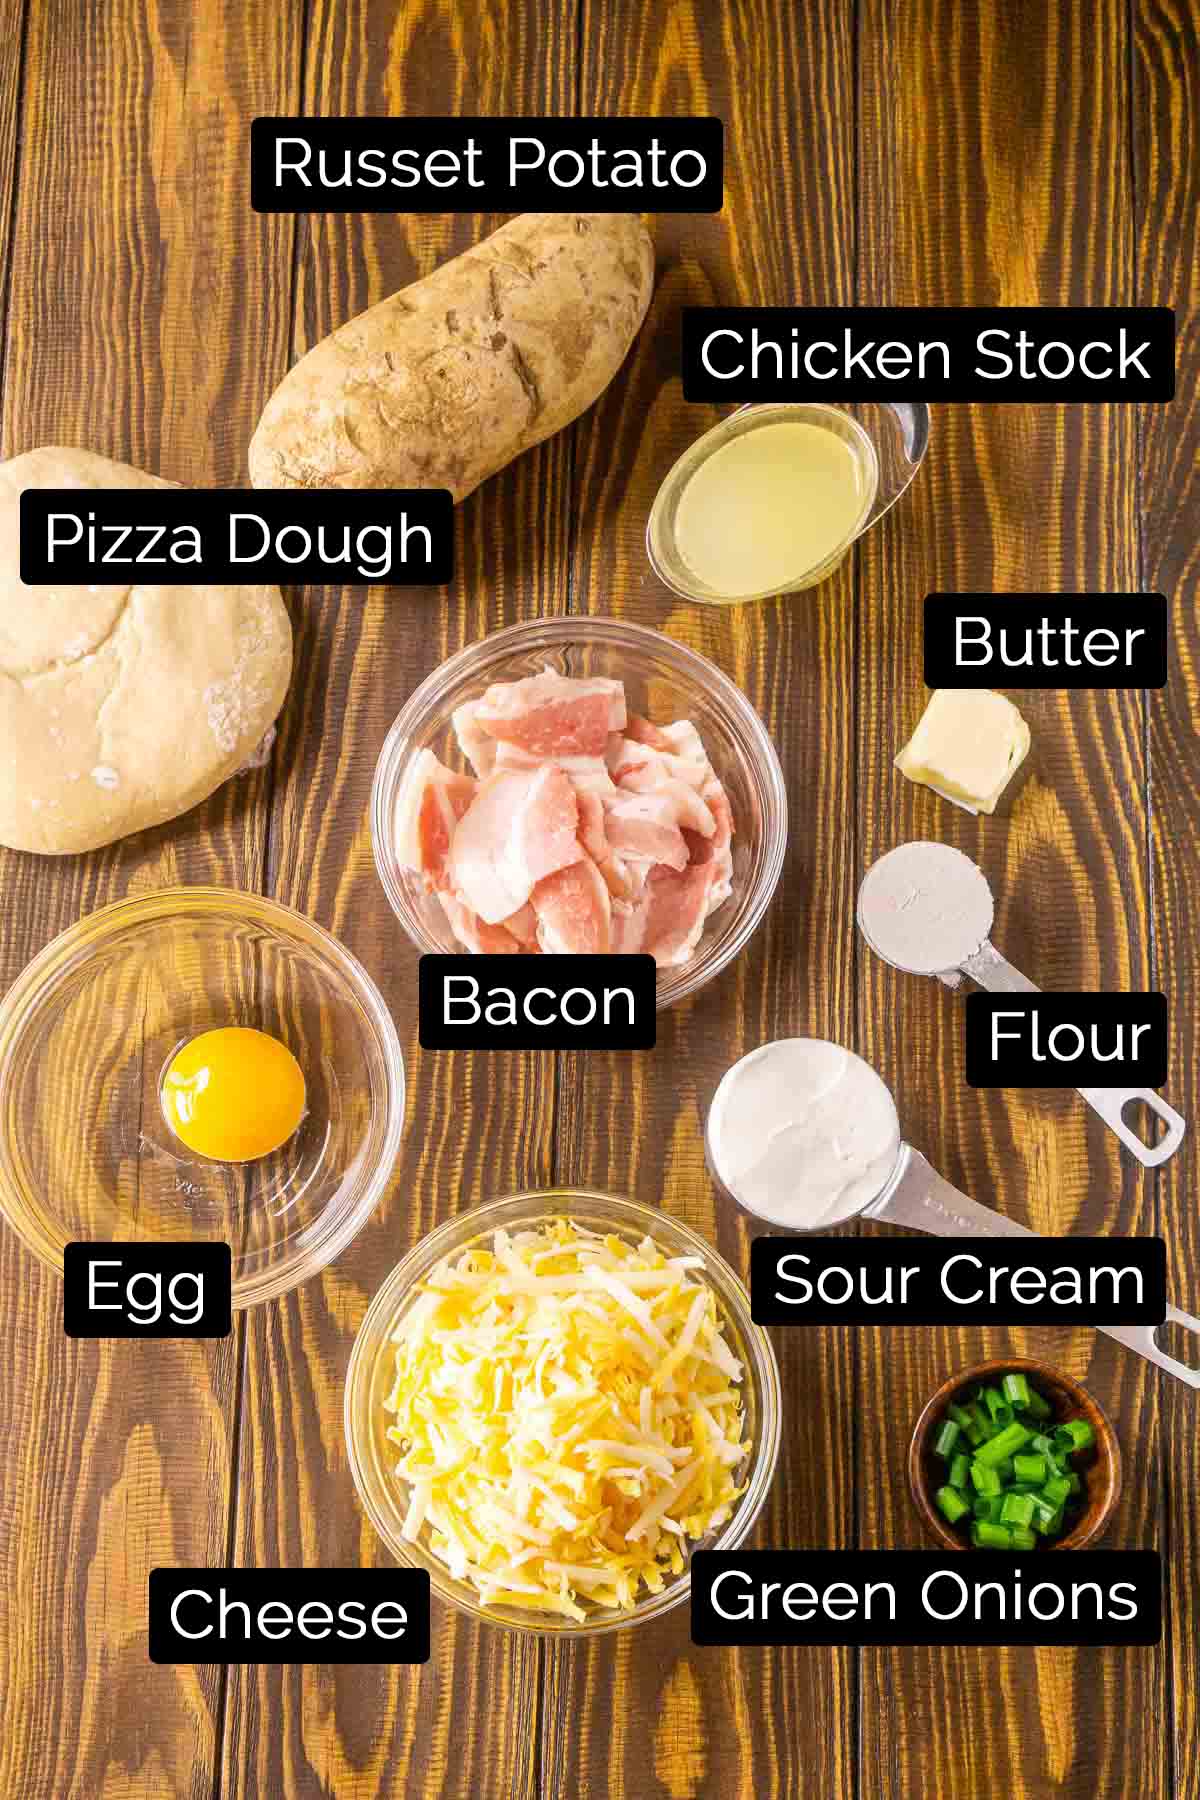 The baked potato pizza ingredients with labels on a wooden board.